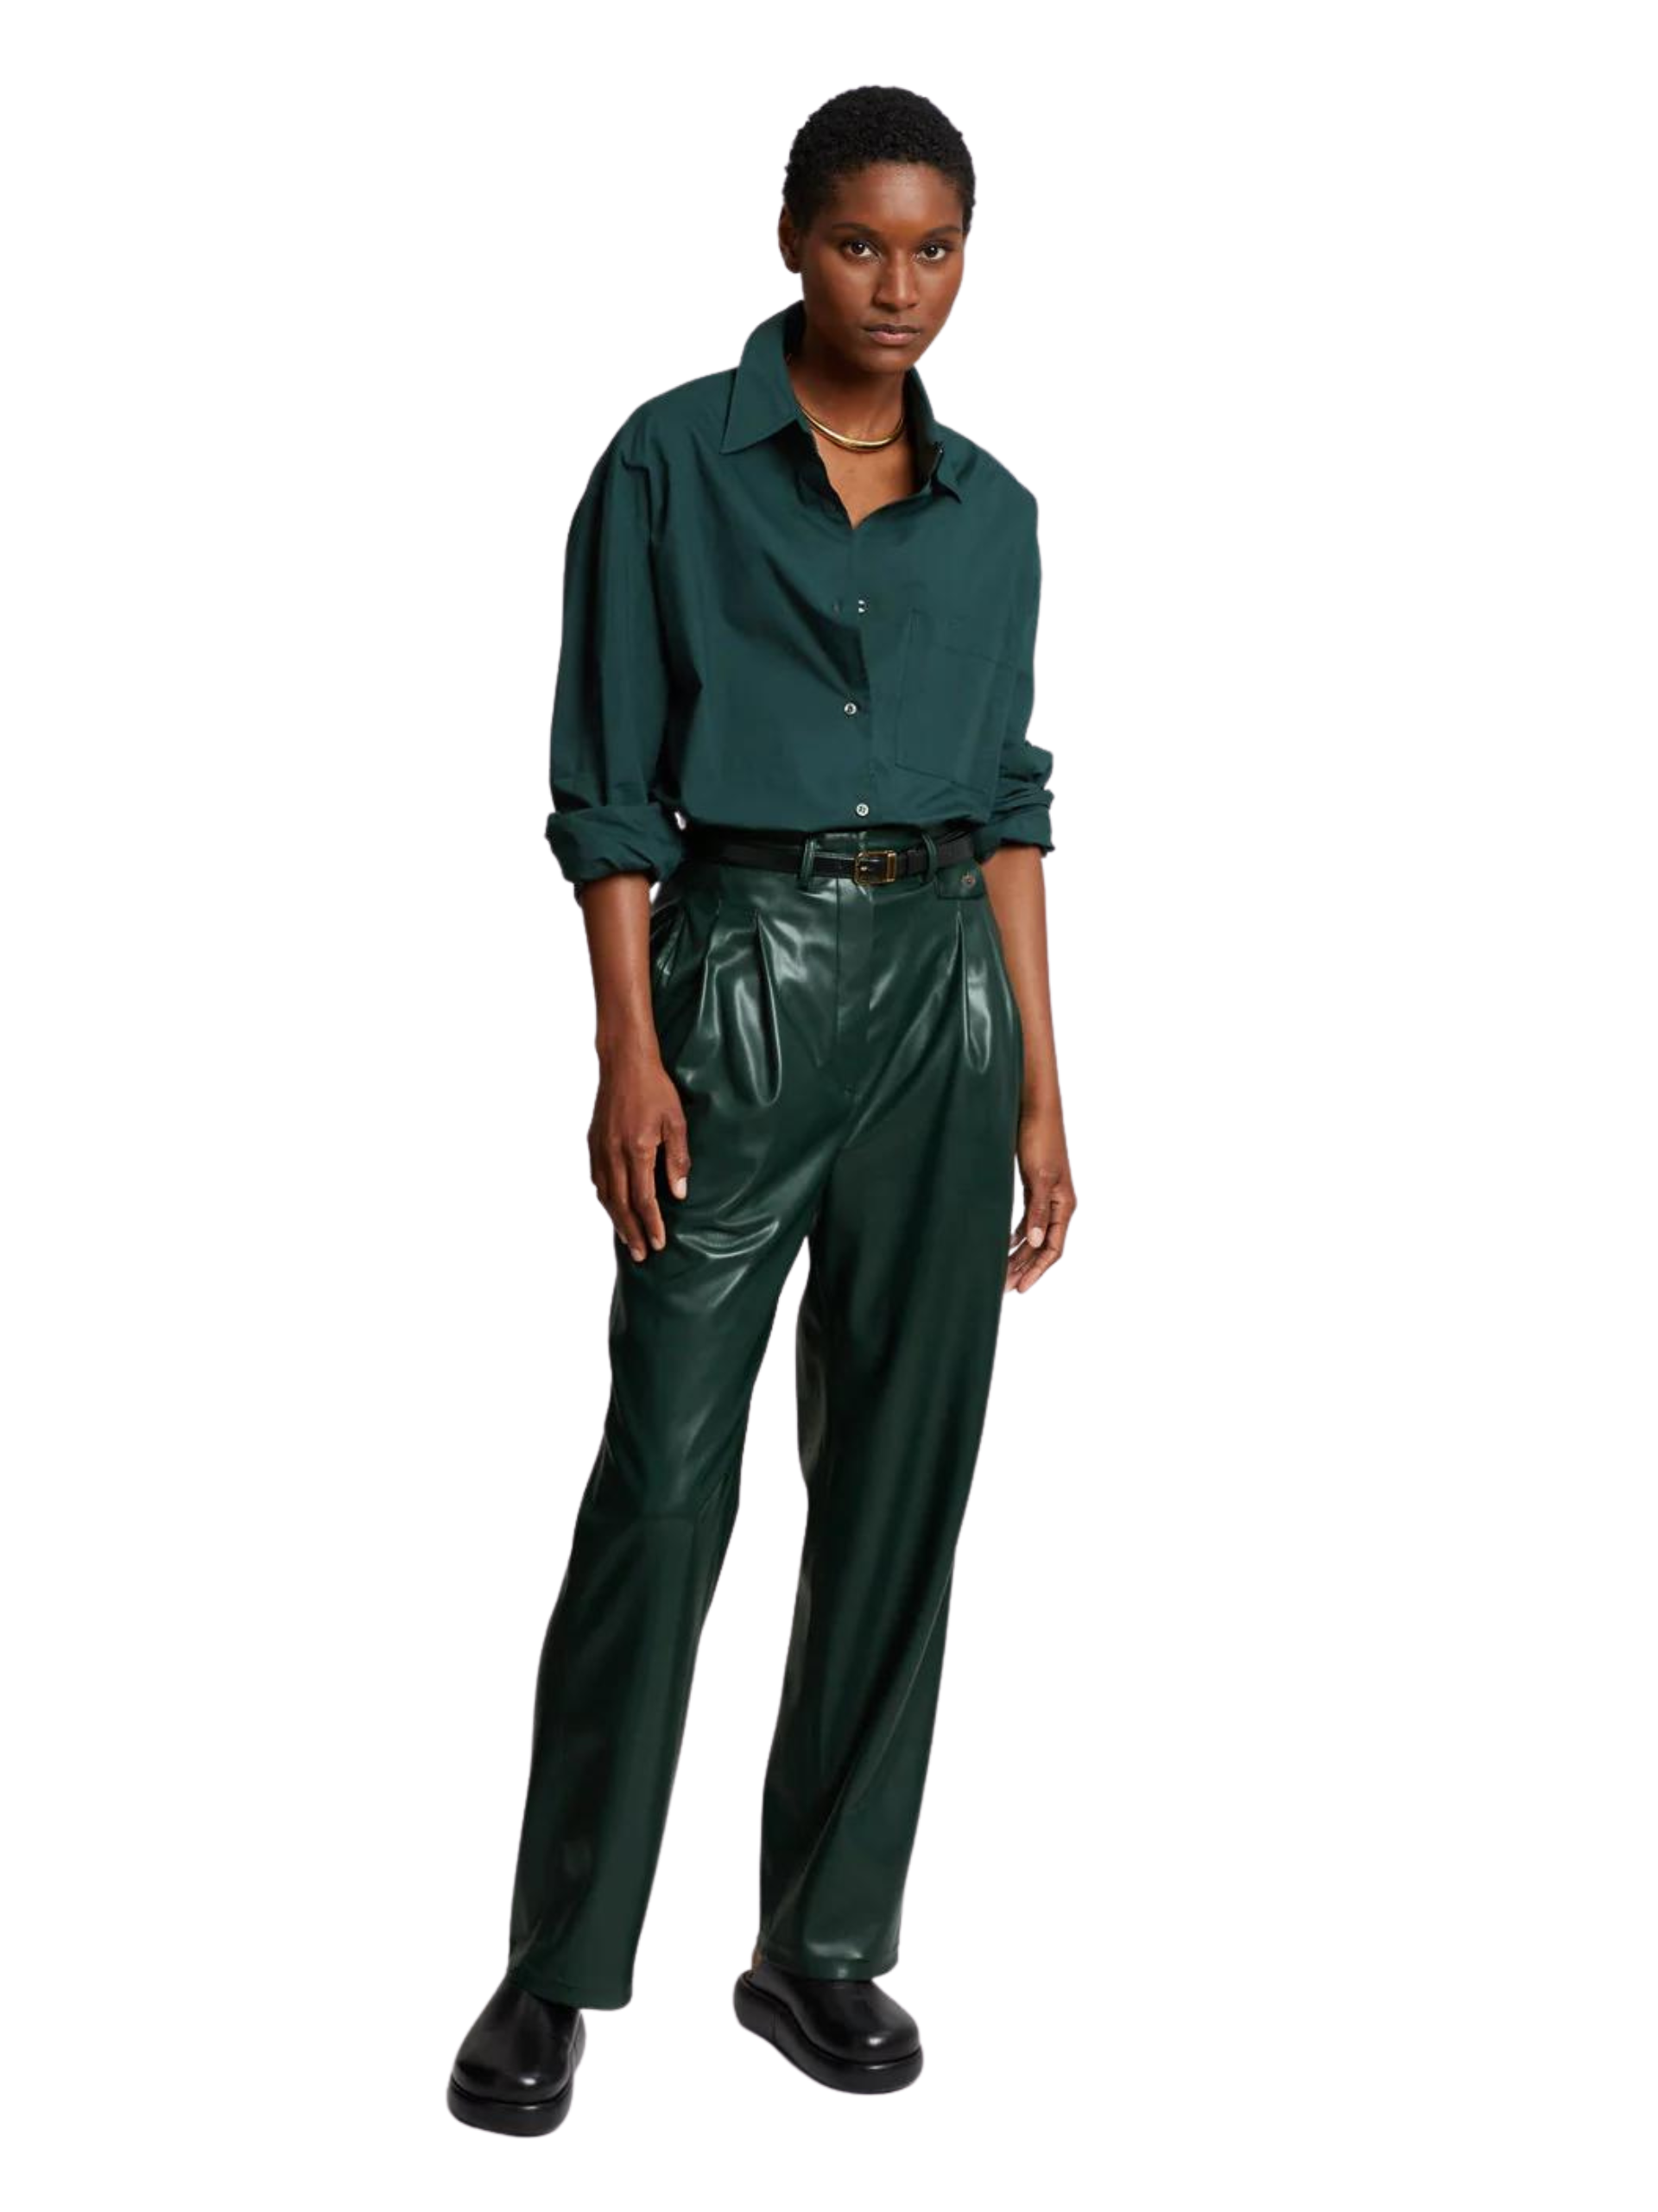 Shop the Finest Mens Green Leather Pants | ChersDelights Leather-  ChersDelights Leather Apparel